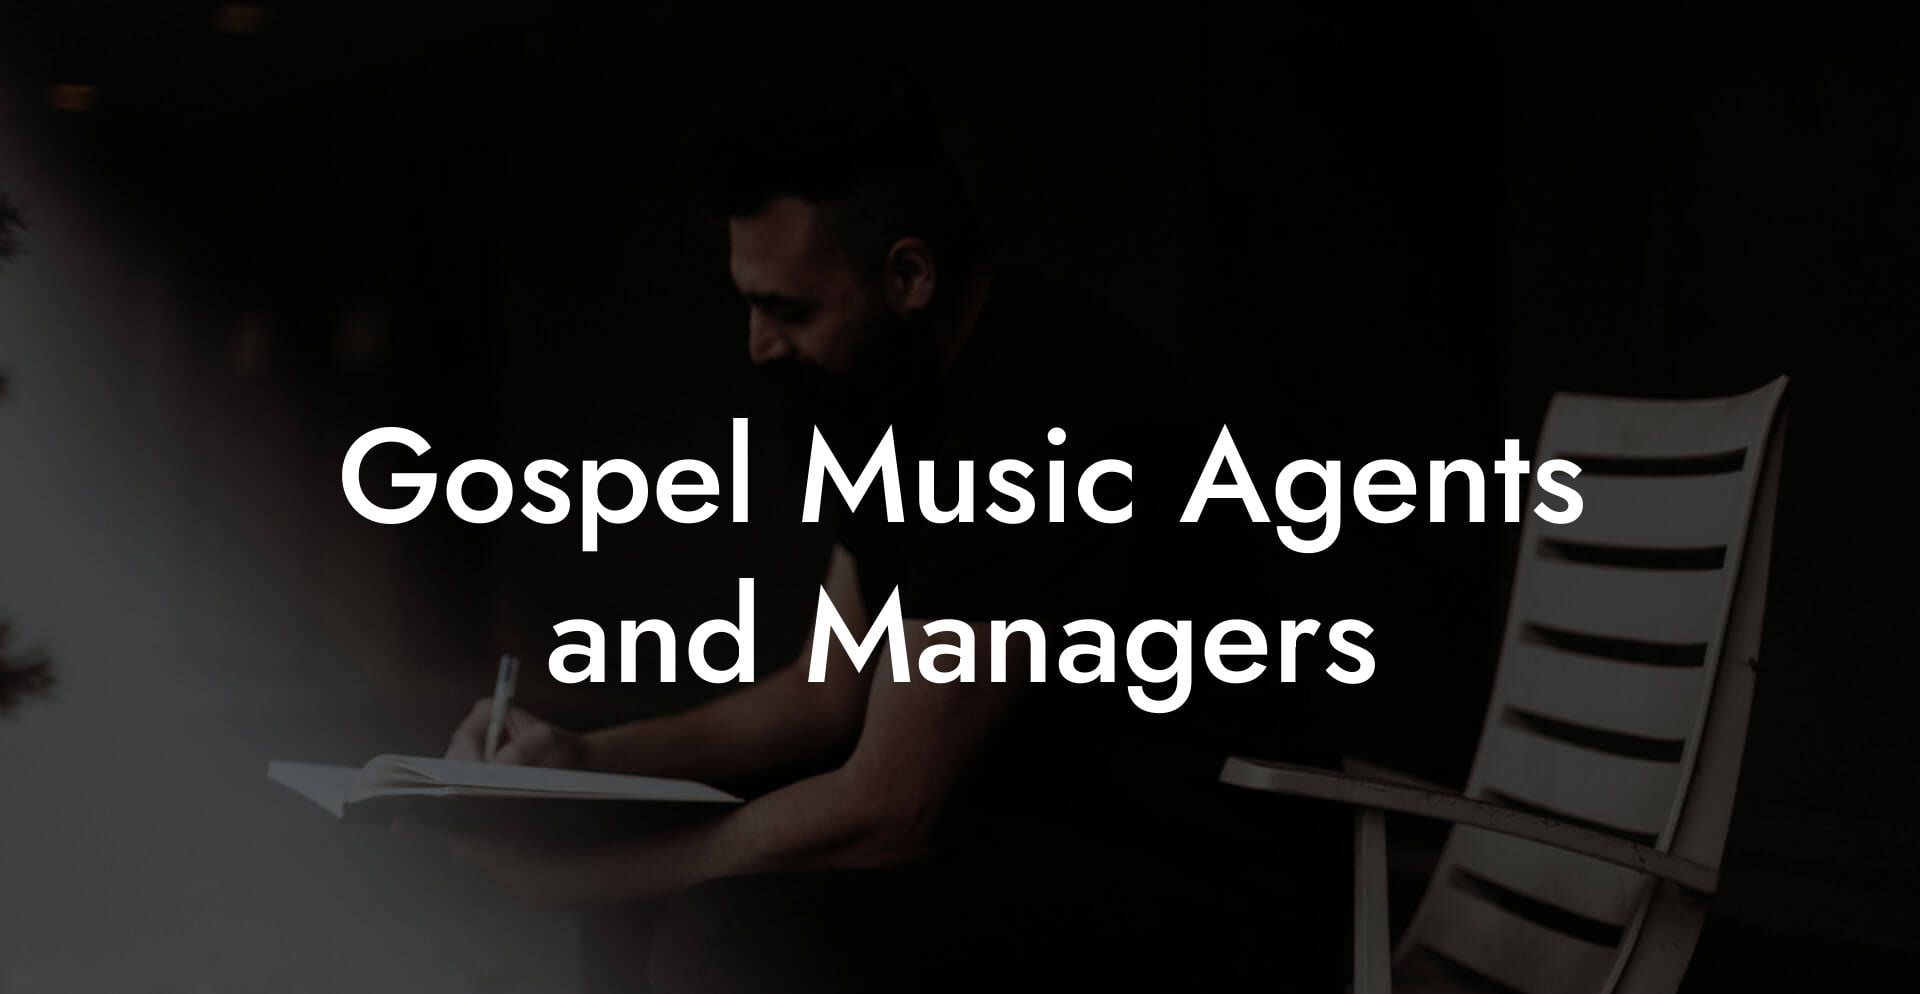 Gospel Music Agents and Managers